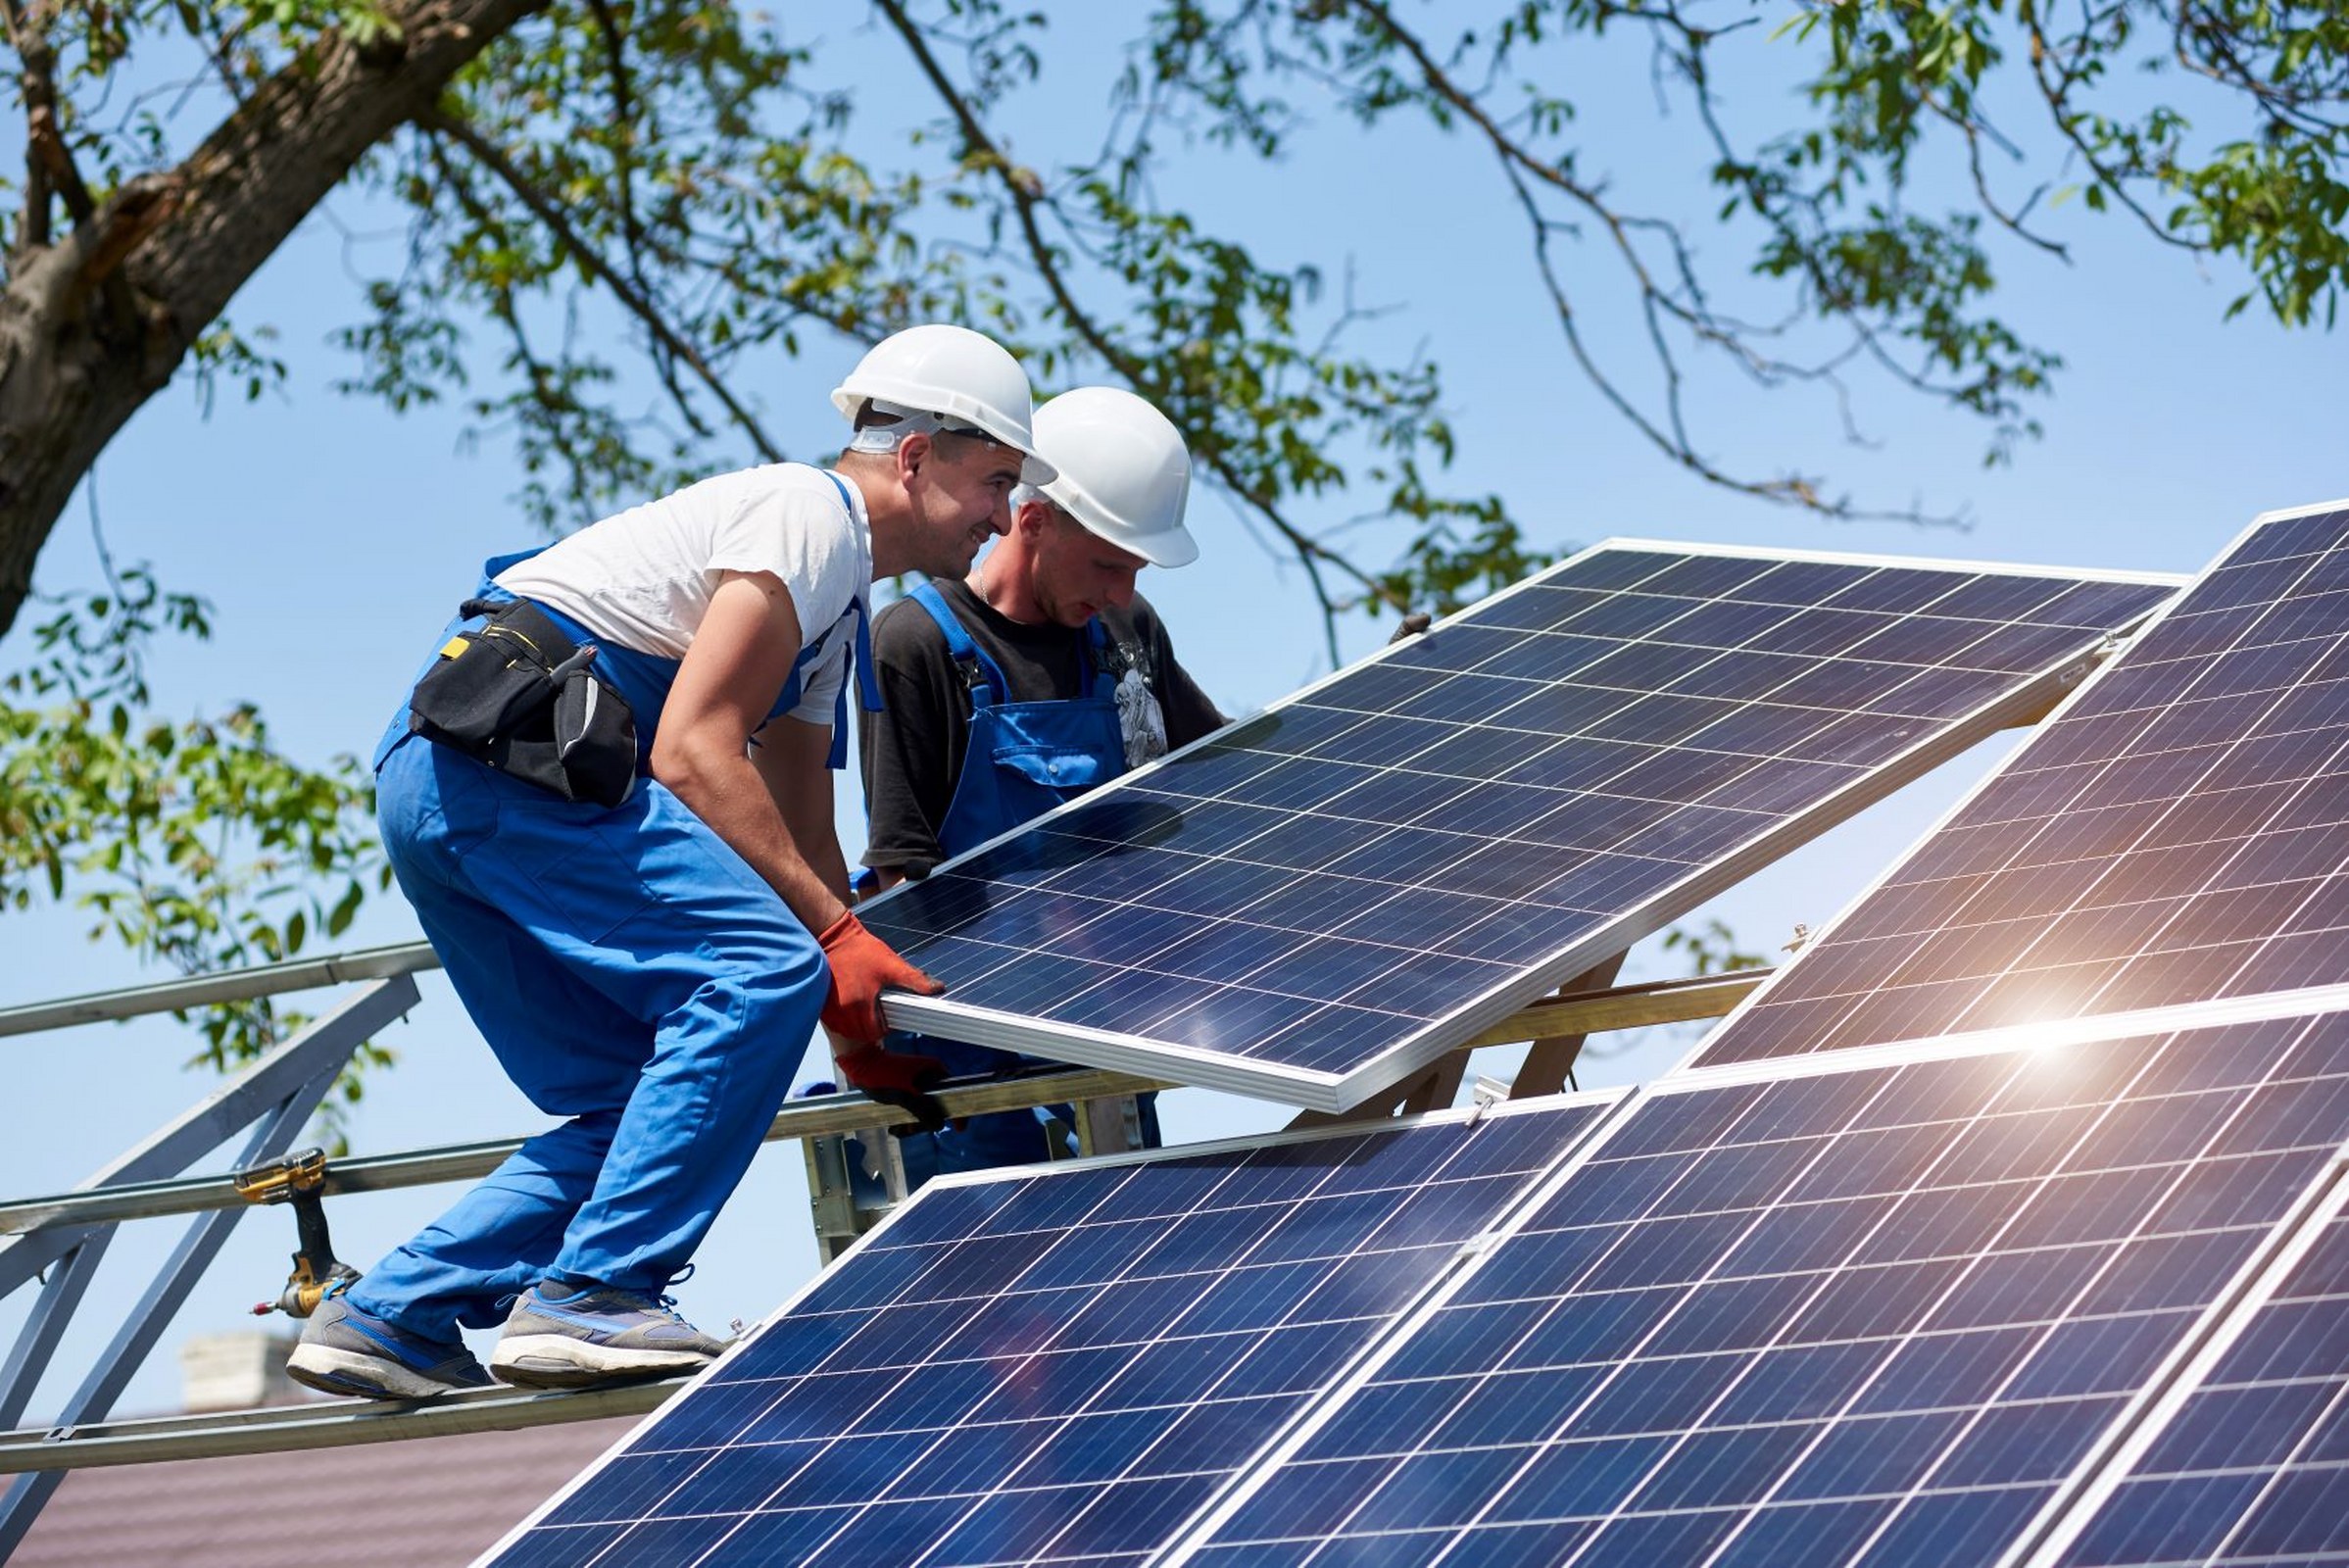 A Beginner's Guide To Installing Home solar panels - The Architects Diary